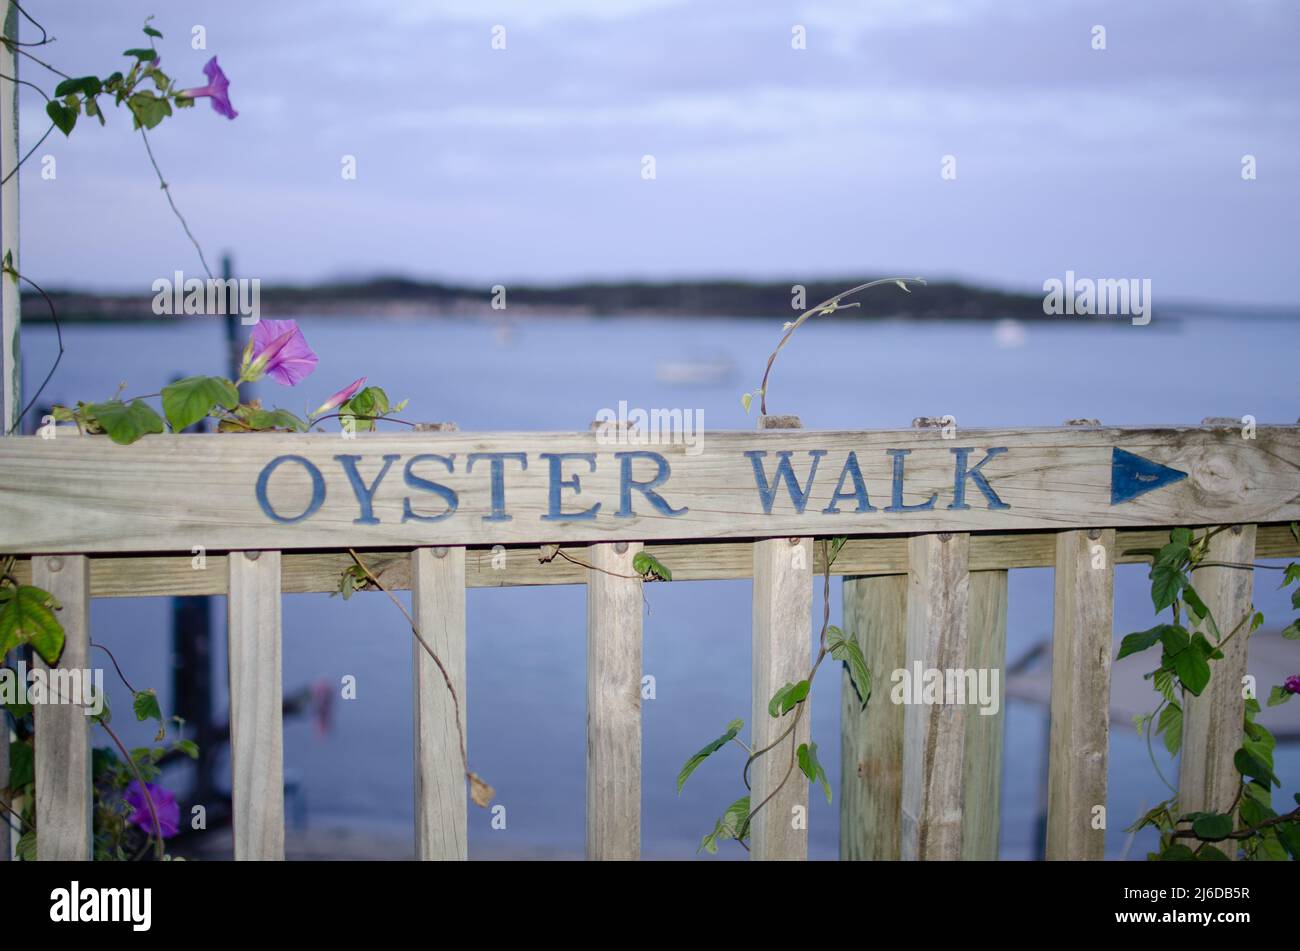 oyster walk sign coffin bay Stock Photo